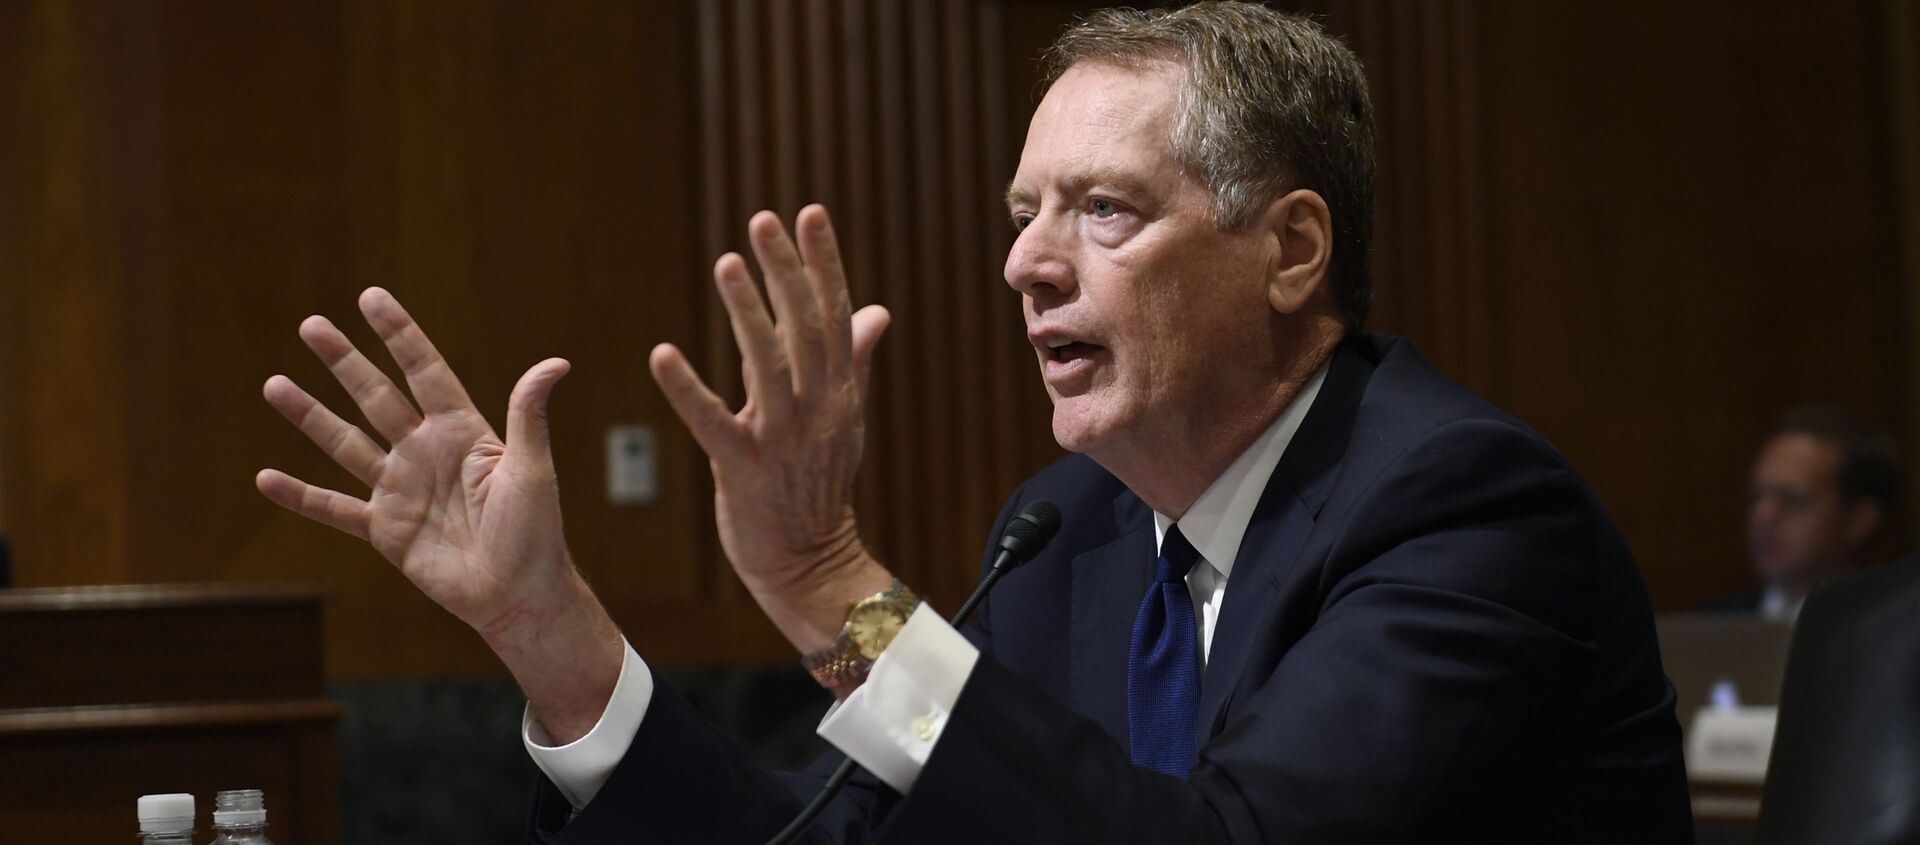 United States Trade Representative Robert Lighthizer testifies before the Senate Finance Committee on Capitol Hill in Washington, Tuesday, June 18, 2019 - Sputnik International, 1920, 18.09.2019